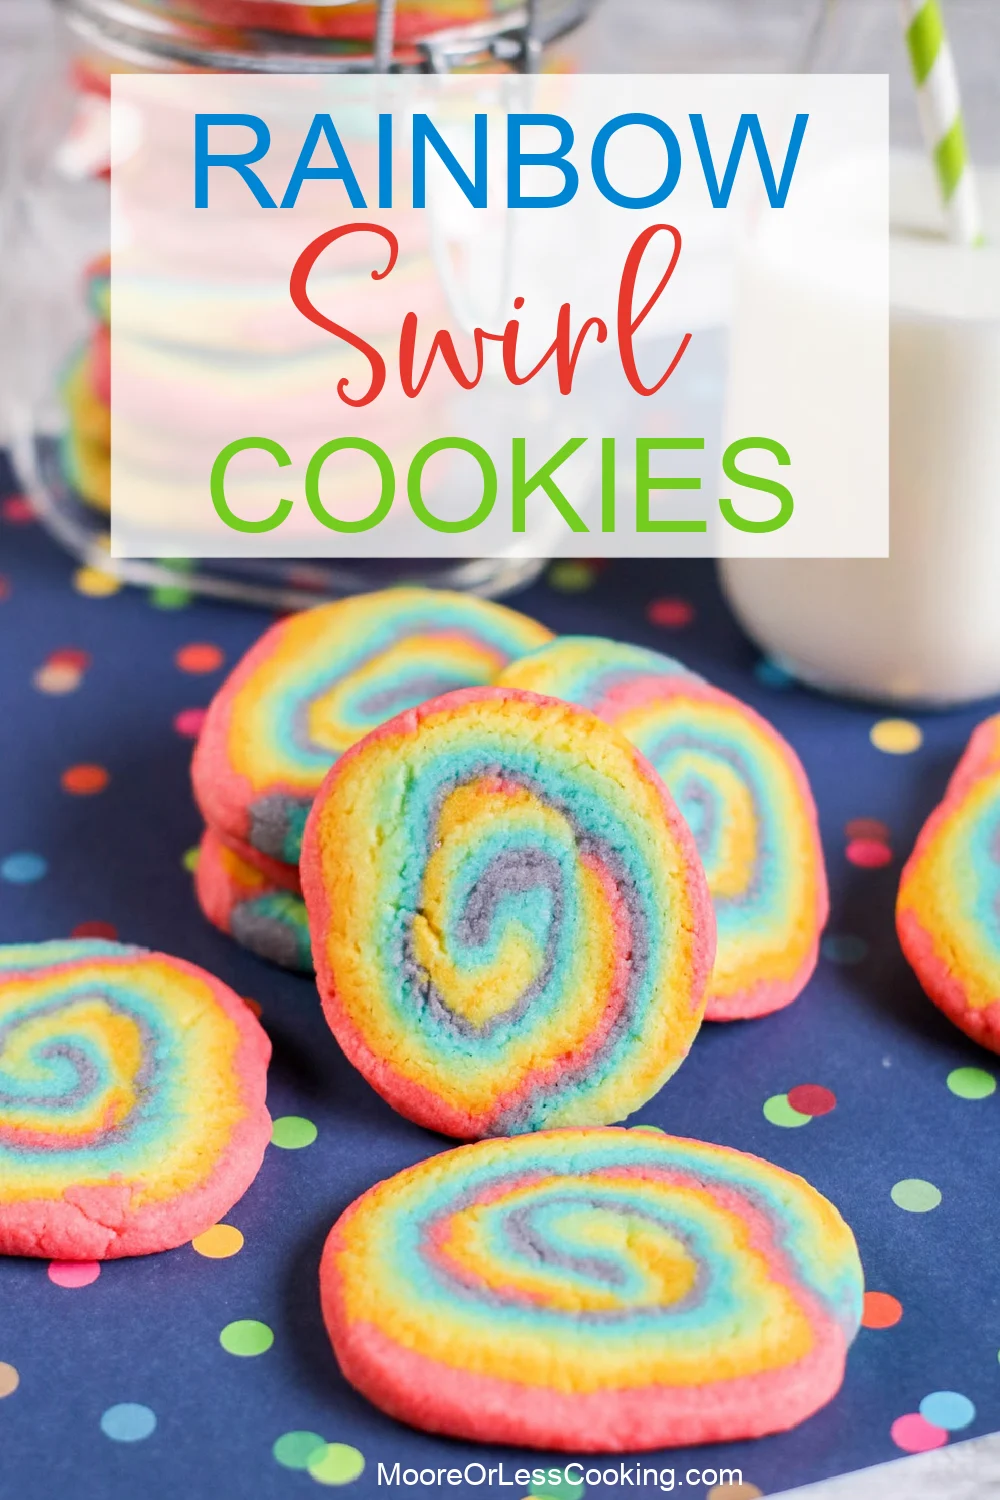 Fun, bright swirls of color make these easy rainbow cookies immediately irresistible! Cookie dough is quickly turned into a pinwheel of color with this fun sugar cookie recipe that's a simple slice and bake effort that's always a hit. via @Mooreorlesscook